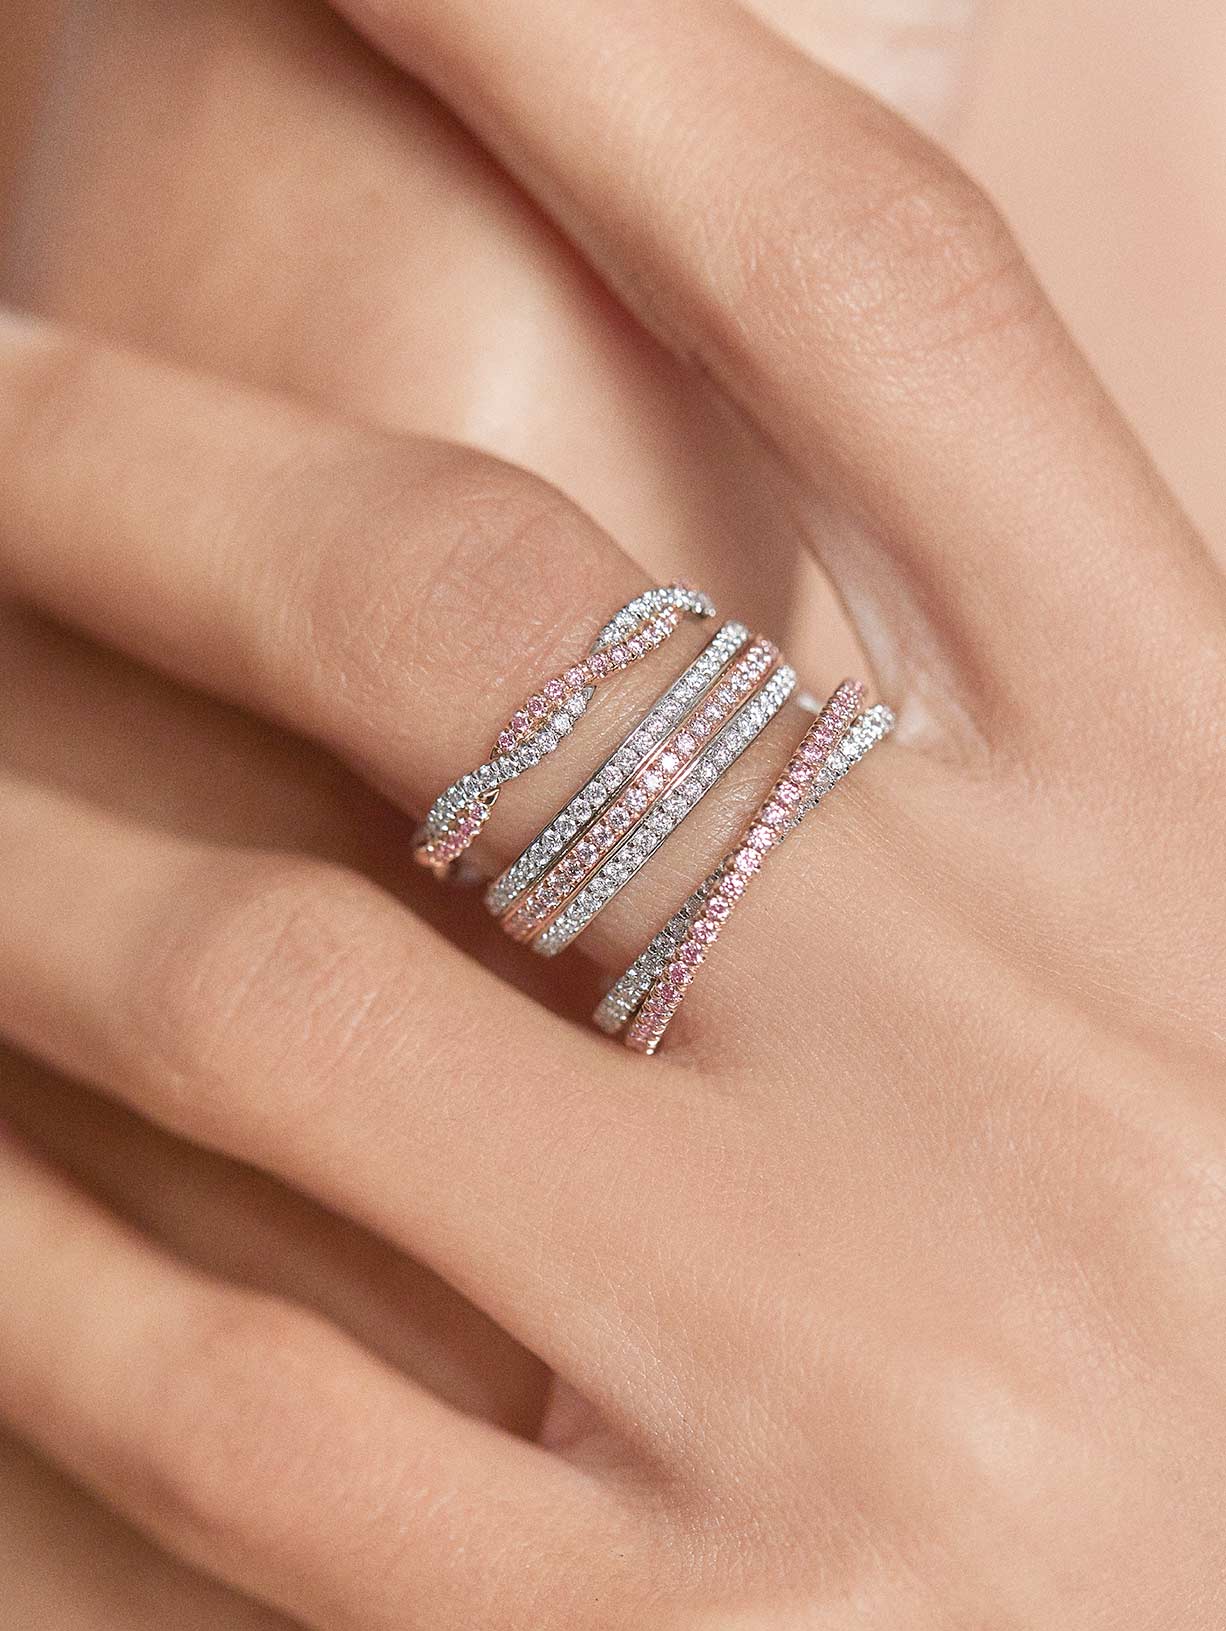 Argyle Pink™ Diamond Movable Double Band - Pink Diamonds, J FINE - J Fine, ring - Pink Diamond Jewelry, j-fine-movable-double-band - Argyle Pink Diamonds